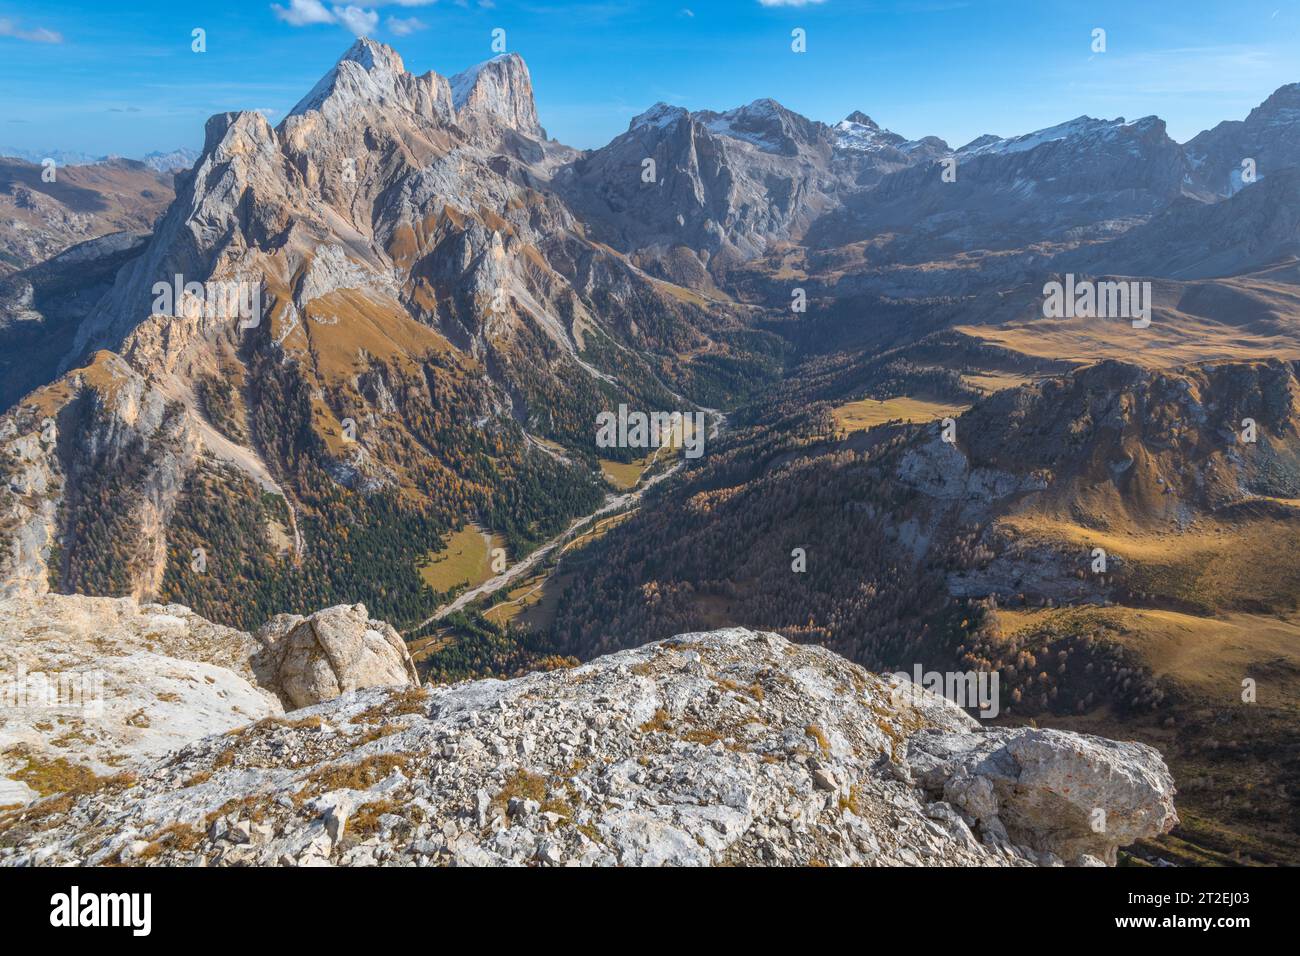 Marmolada, queen of the Dolomites, imposing mountain towering the Contrin valley below. Autumnal vegetation in high alpine country. Stock Photo